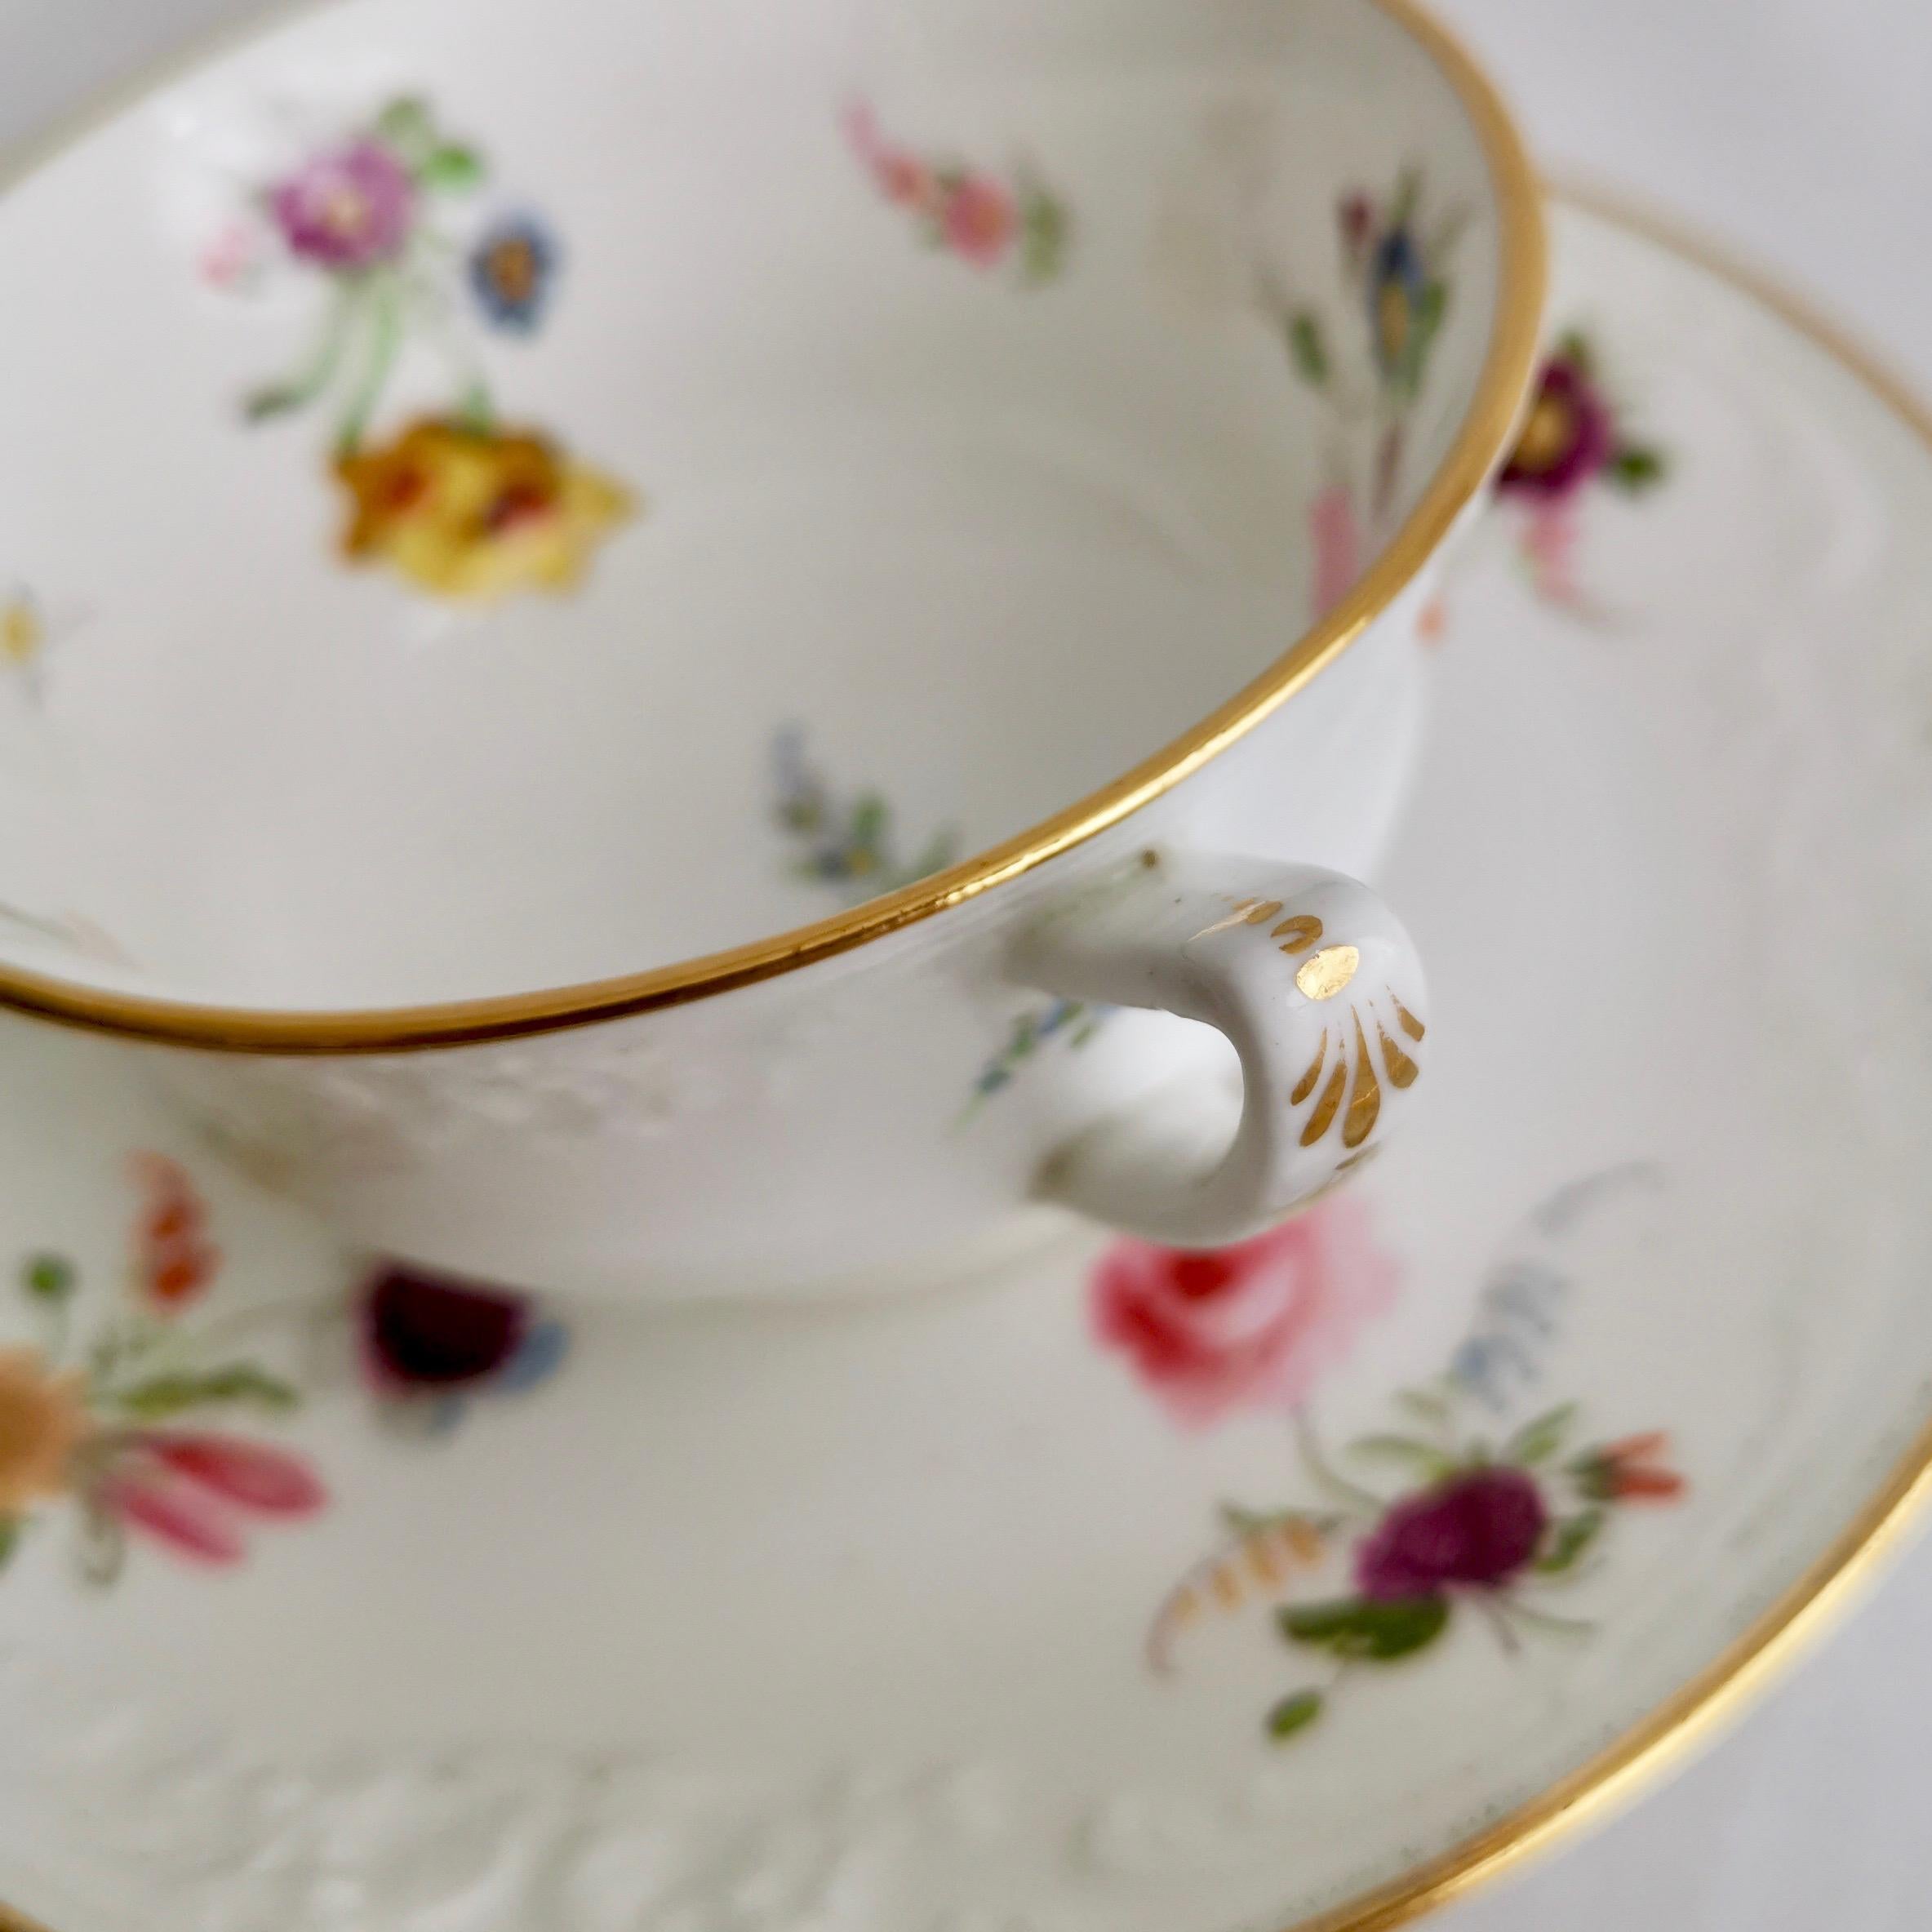 Davenport Porcelain Teacup, White with Hand Painted Flowers, circa 1820 8